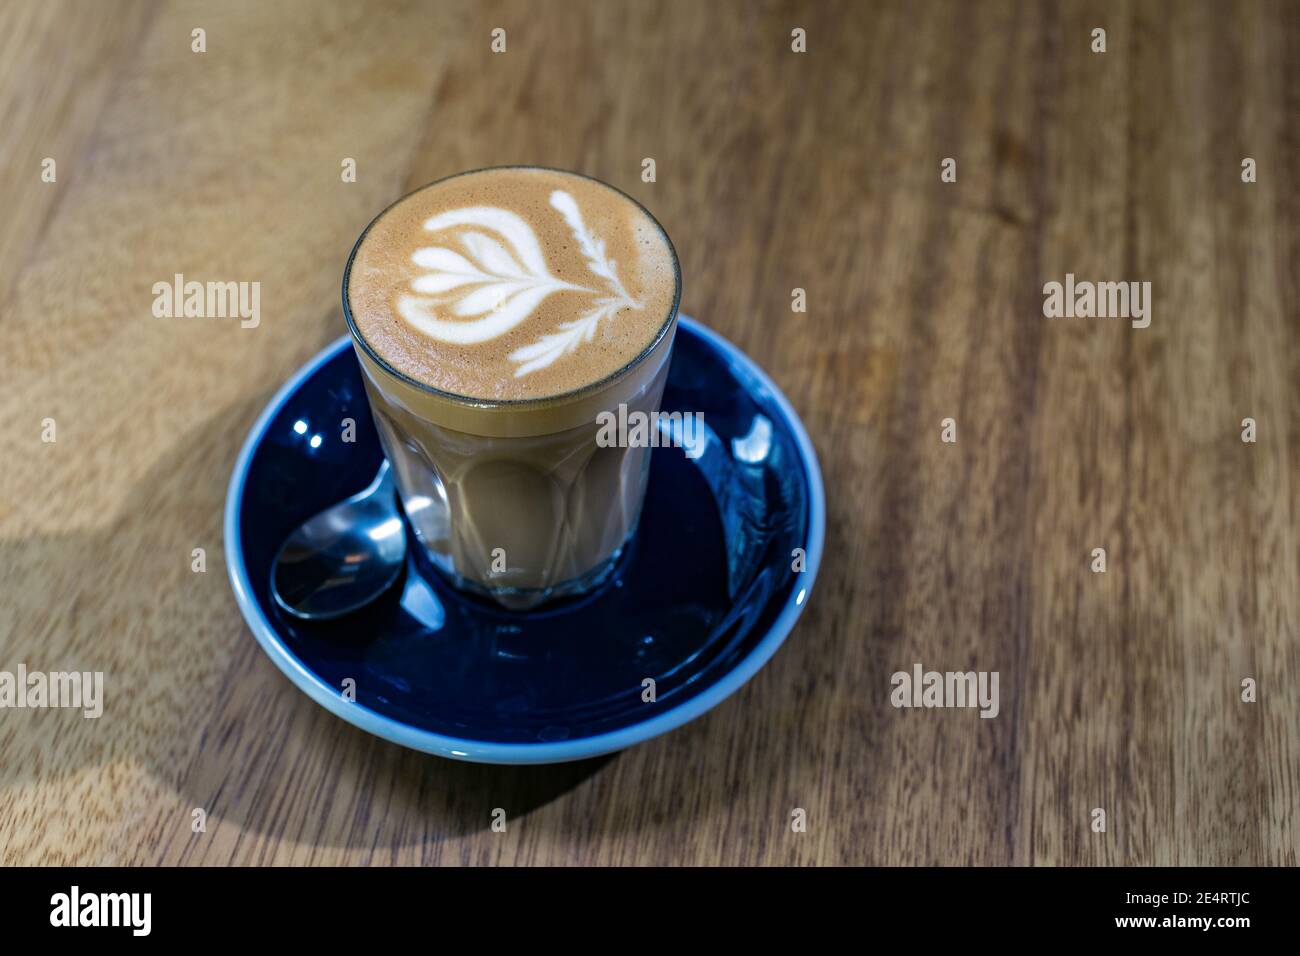 Glass of a flat white coffee on rustic wooden table close-up. Stock Photo